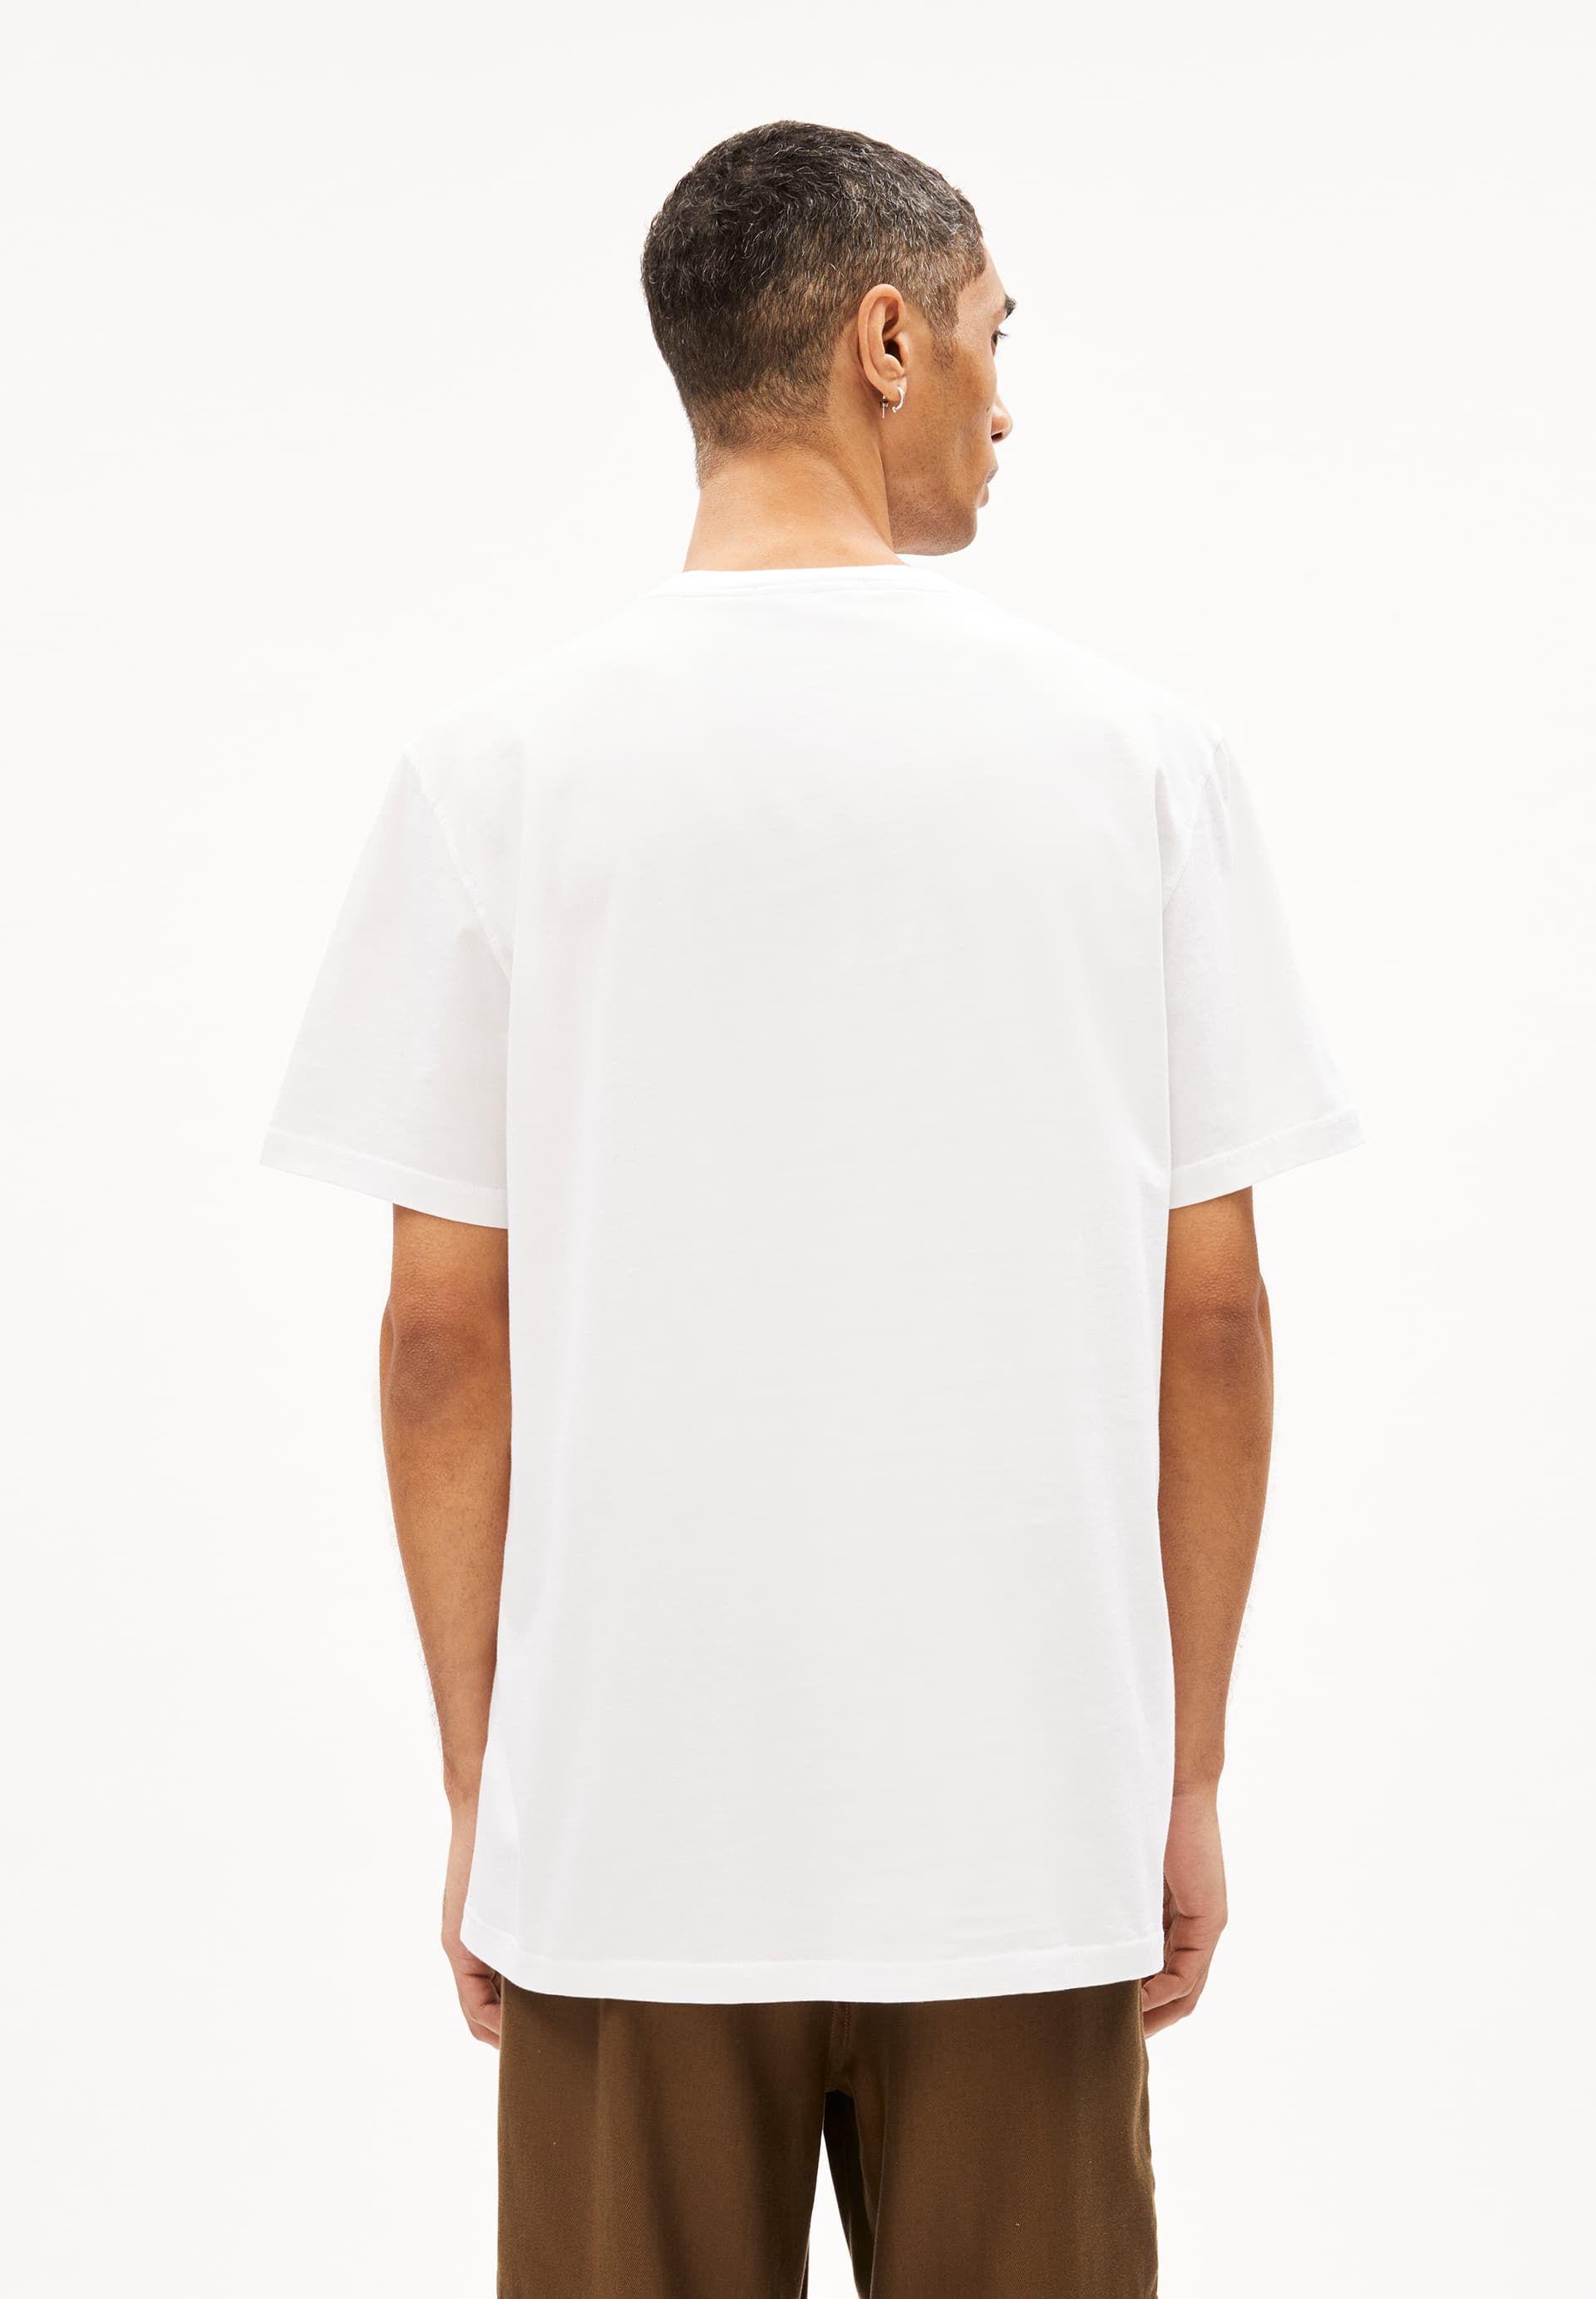 AADONI A SIGNATURE T-Shirt Relaxed Fit made of Organic Cotton